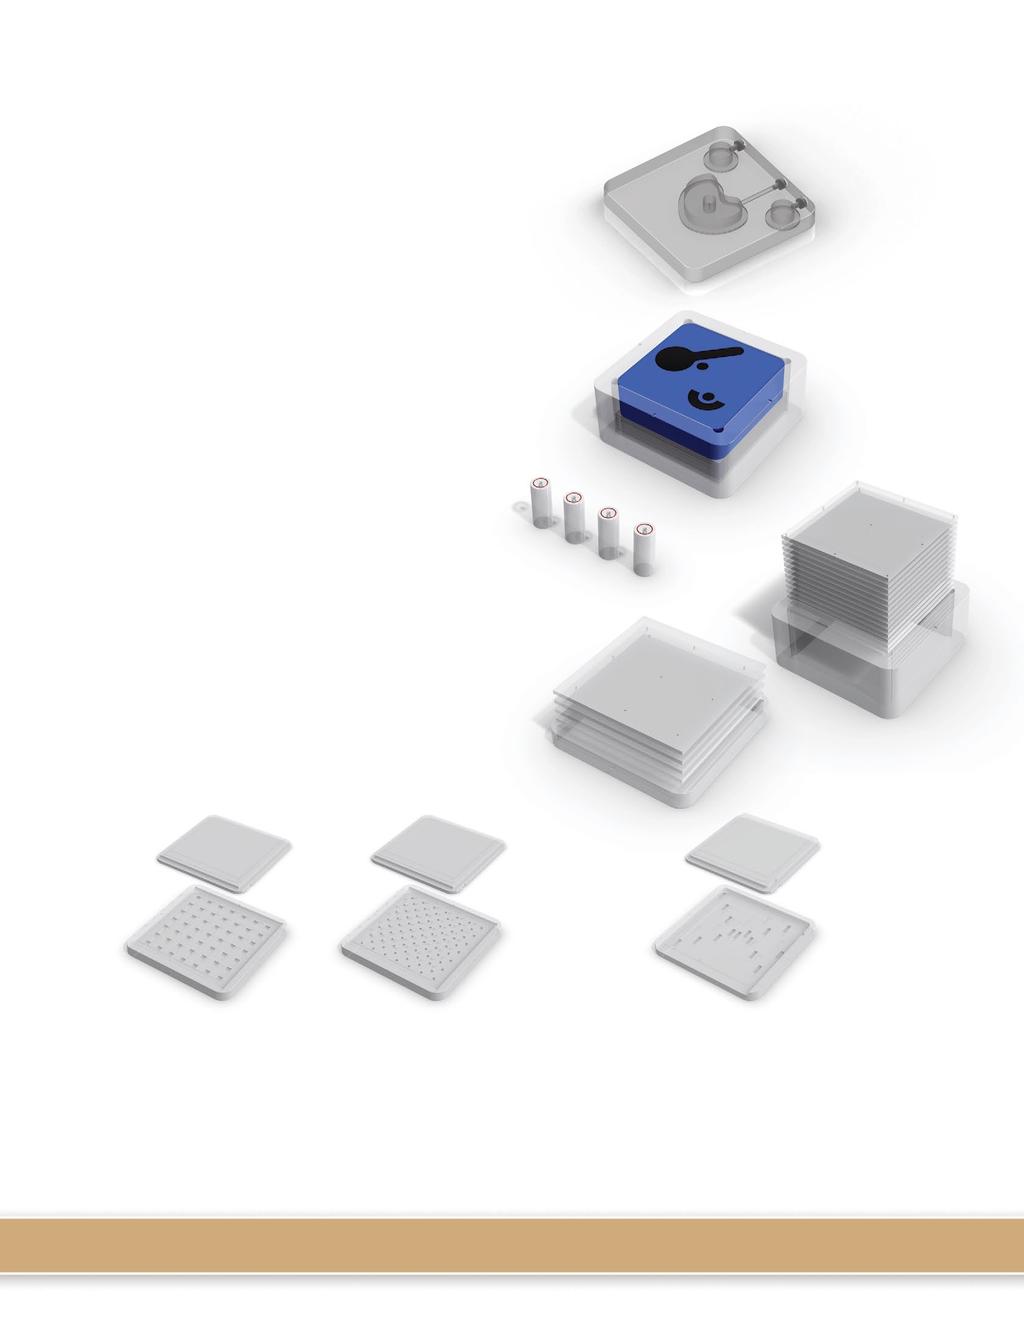 Additional Accessories MRI Isocentric Volume Insert This insert has an isocentrically-placed target of known volume for integrated testing of CT and MR imaging, image fusion and treatment planning